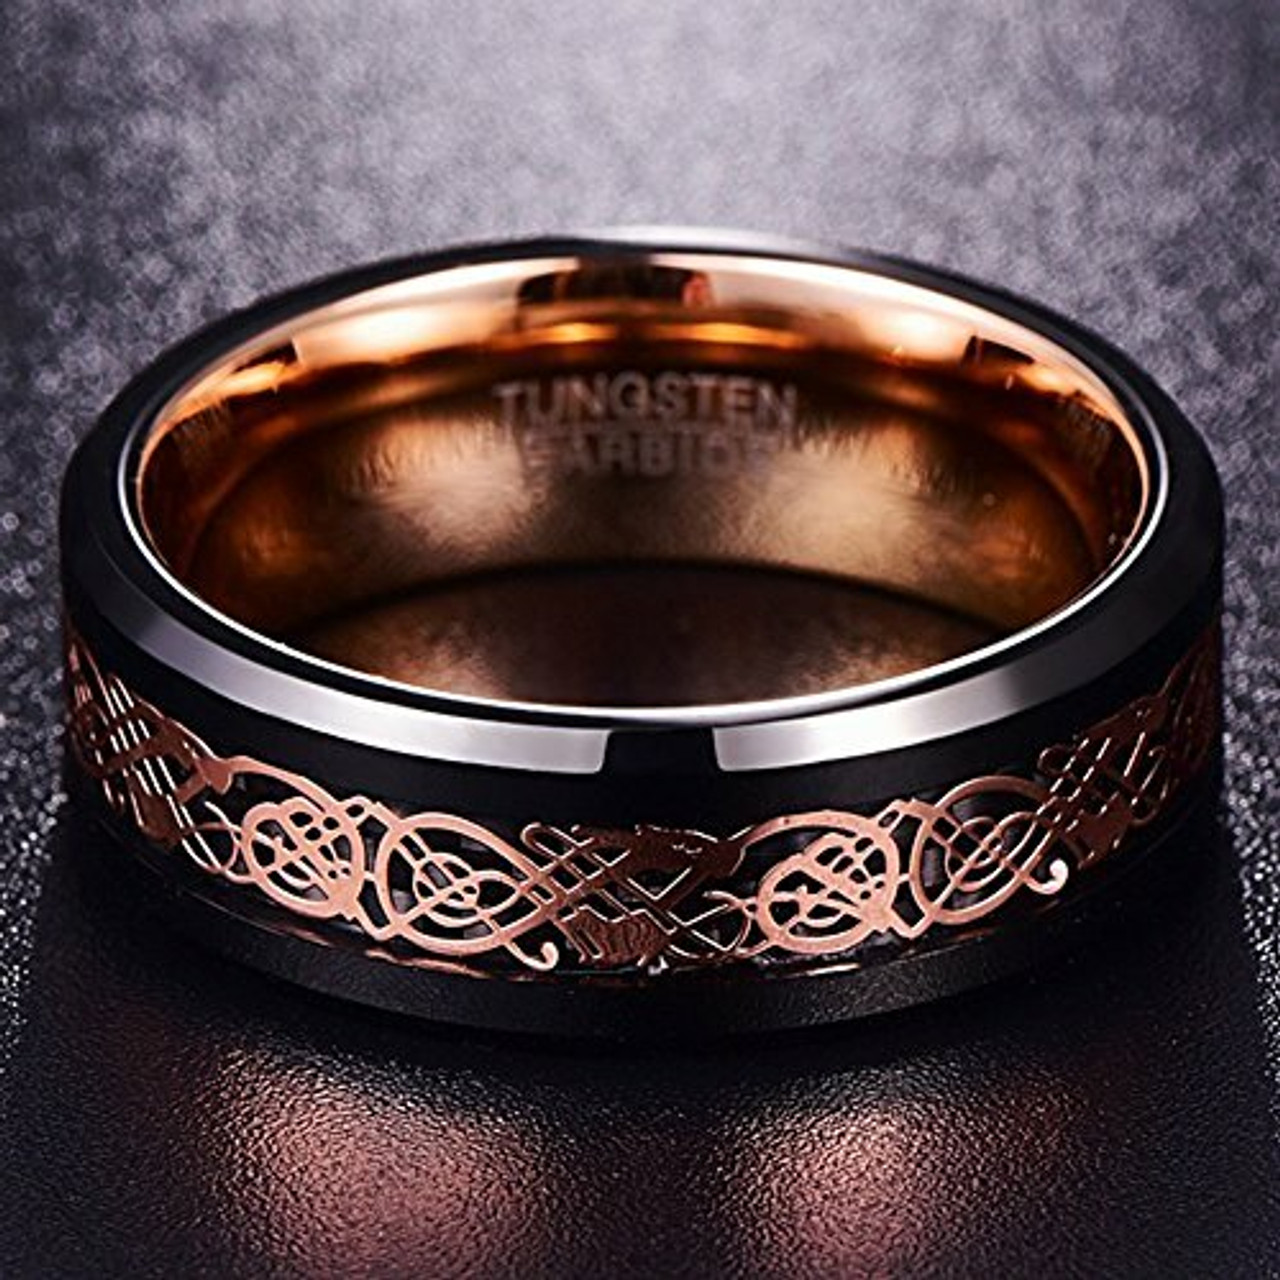 Unisex or Men's Tungsten Wedding Band (8mm). Celtic Wedding Band Black with Inner and Top Rose Gold Resin Inlay Celtic Knot